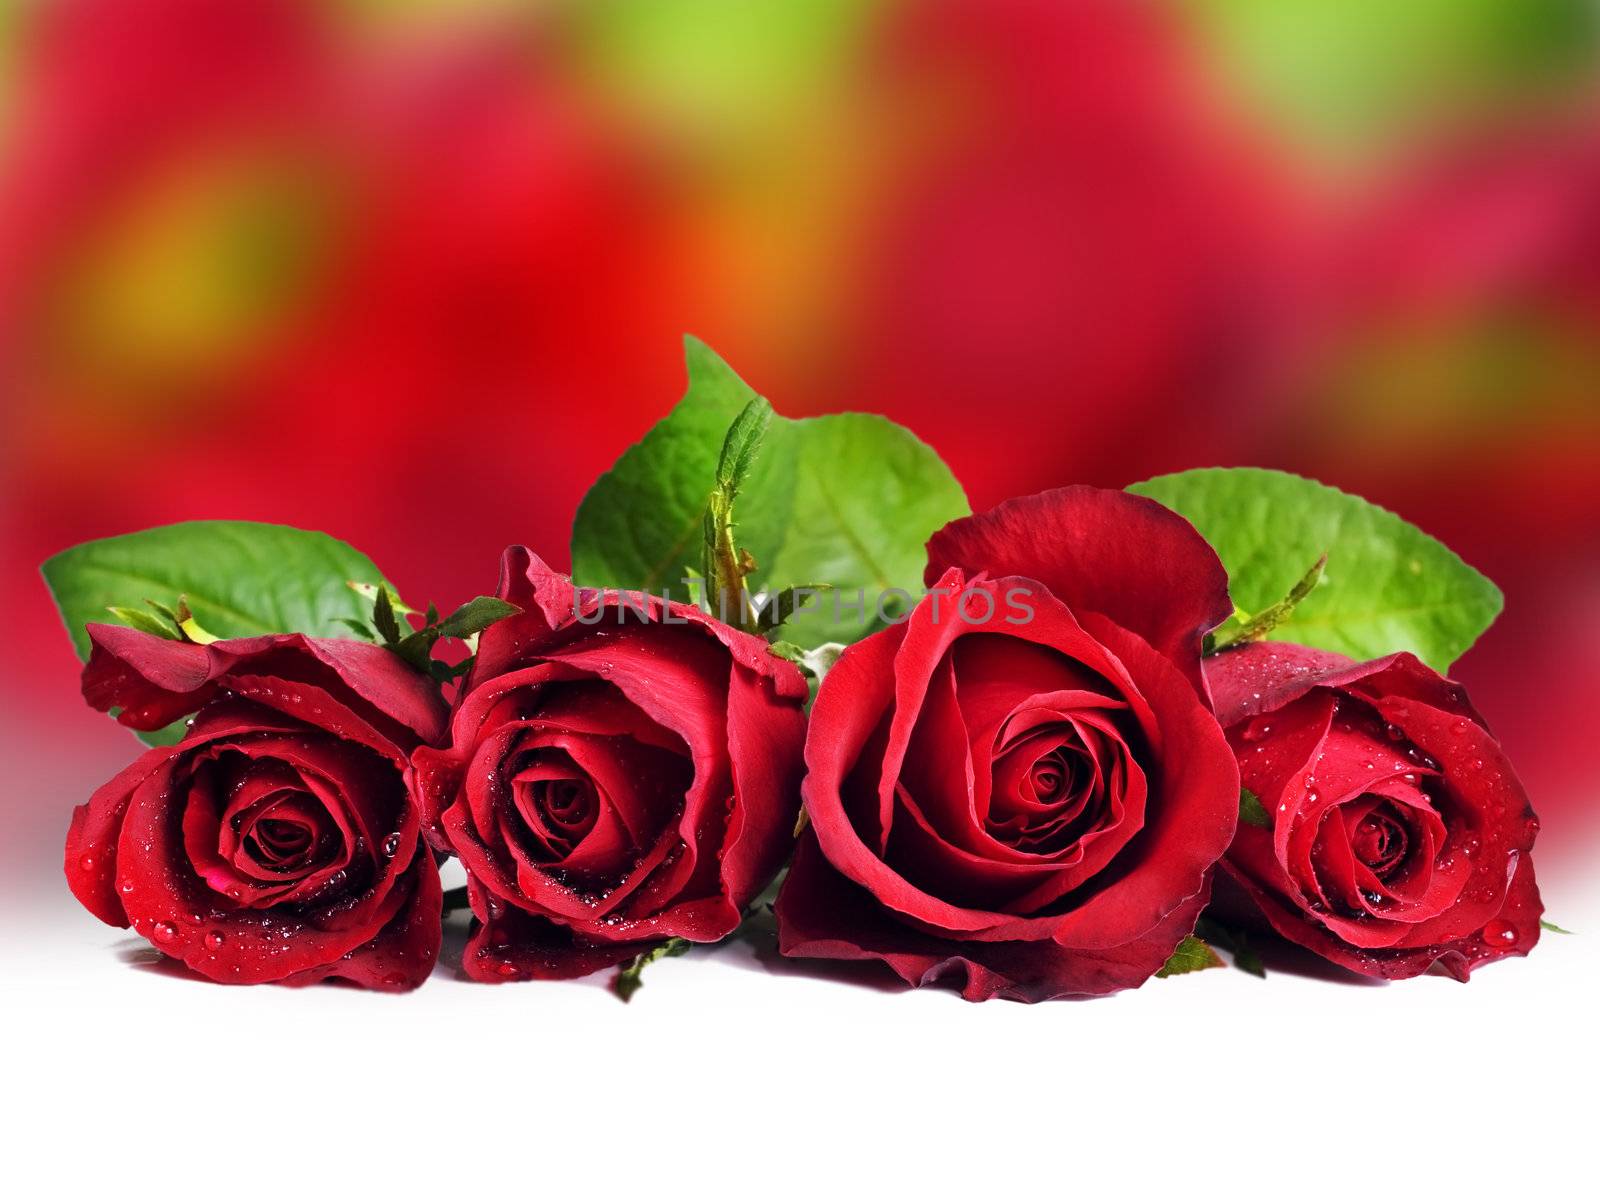 a Beautiful red rose background by tish1